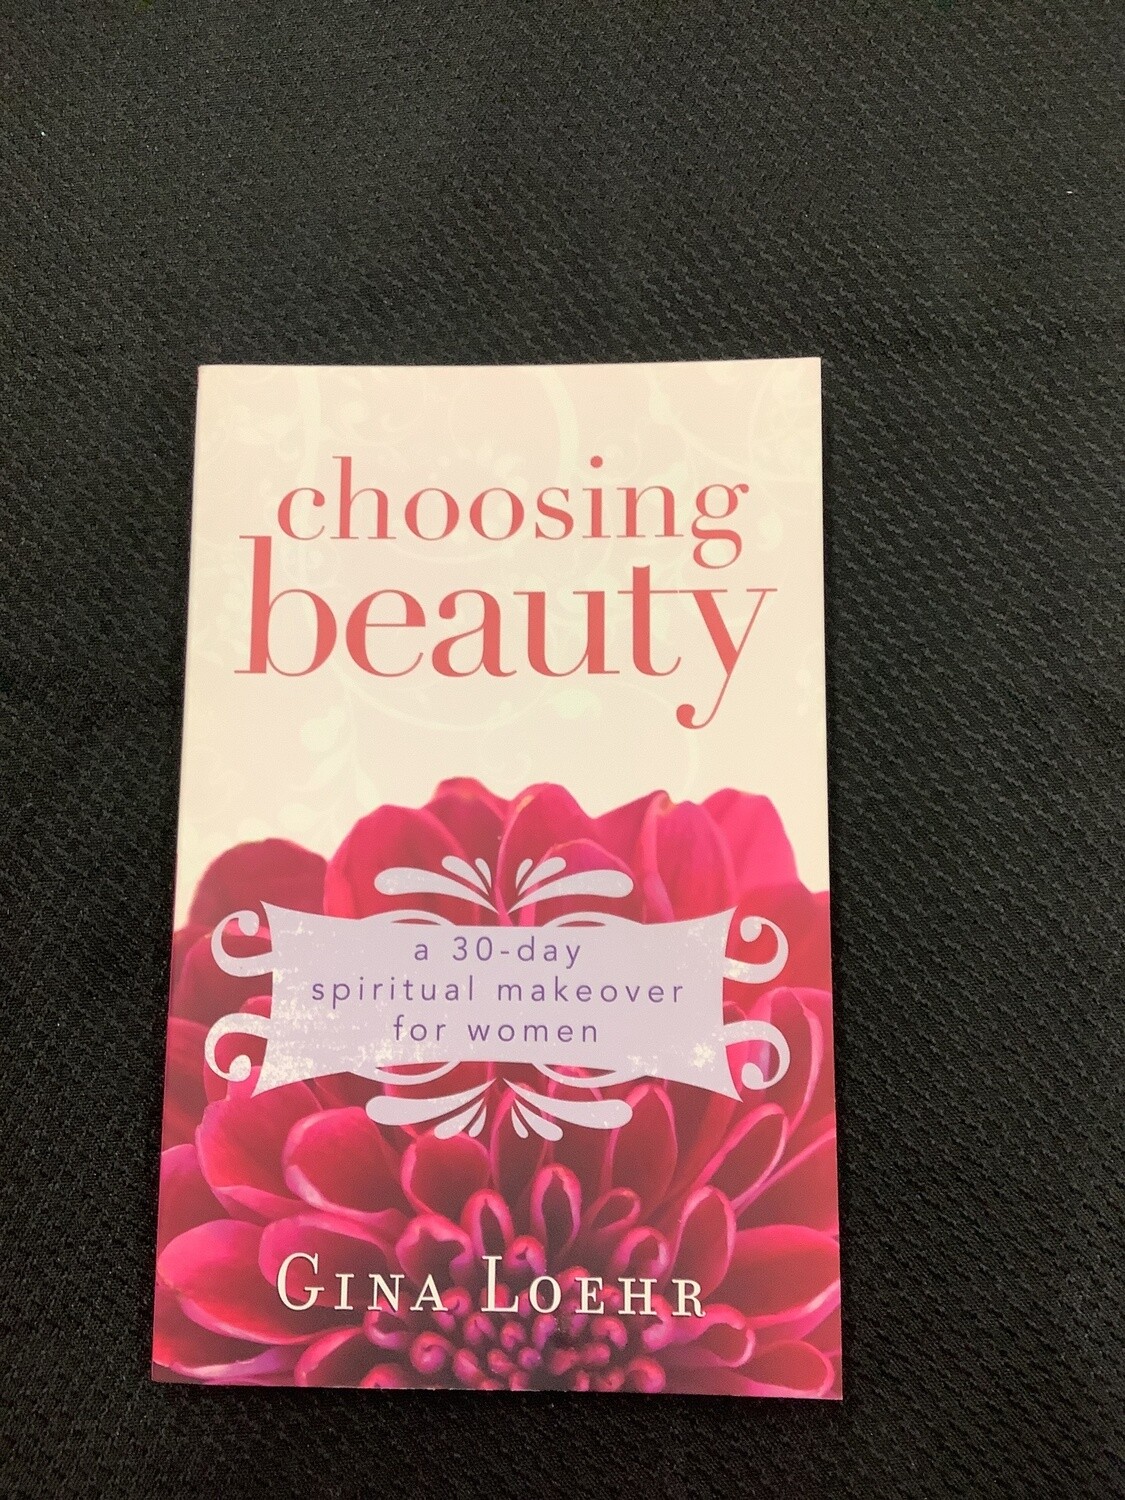 Choosing Beauty A 30-Day Spiritual Makeover for Women - Gina Loehr